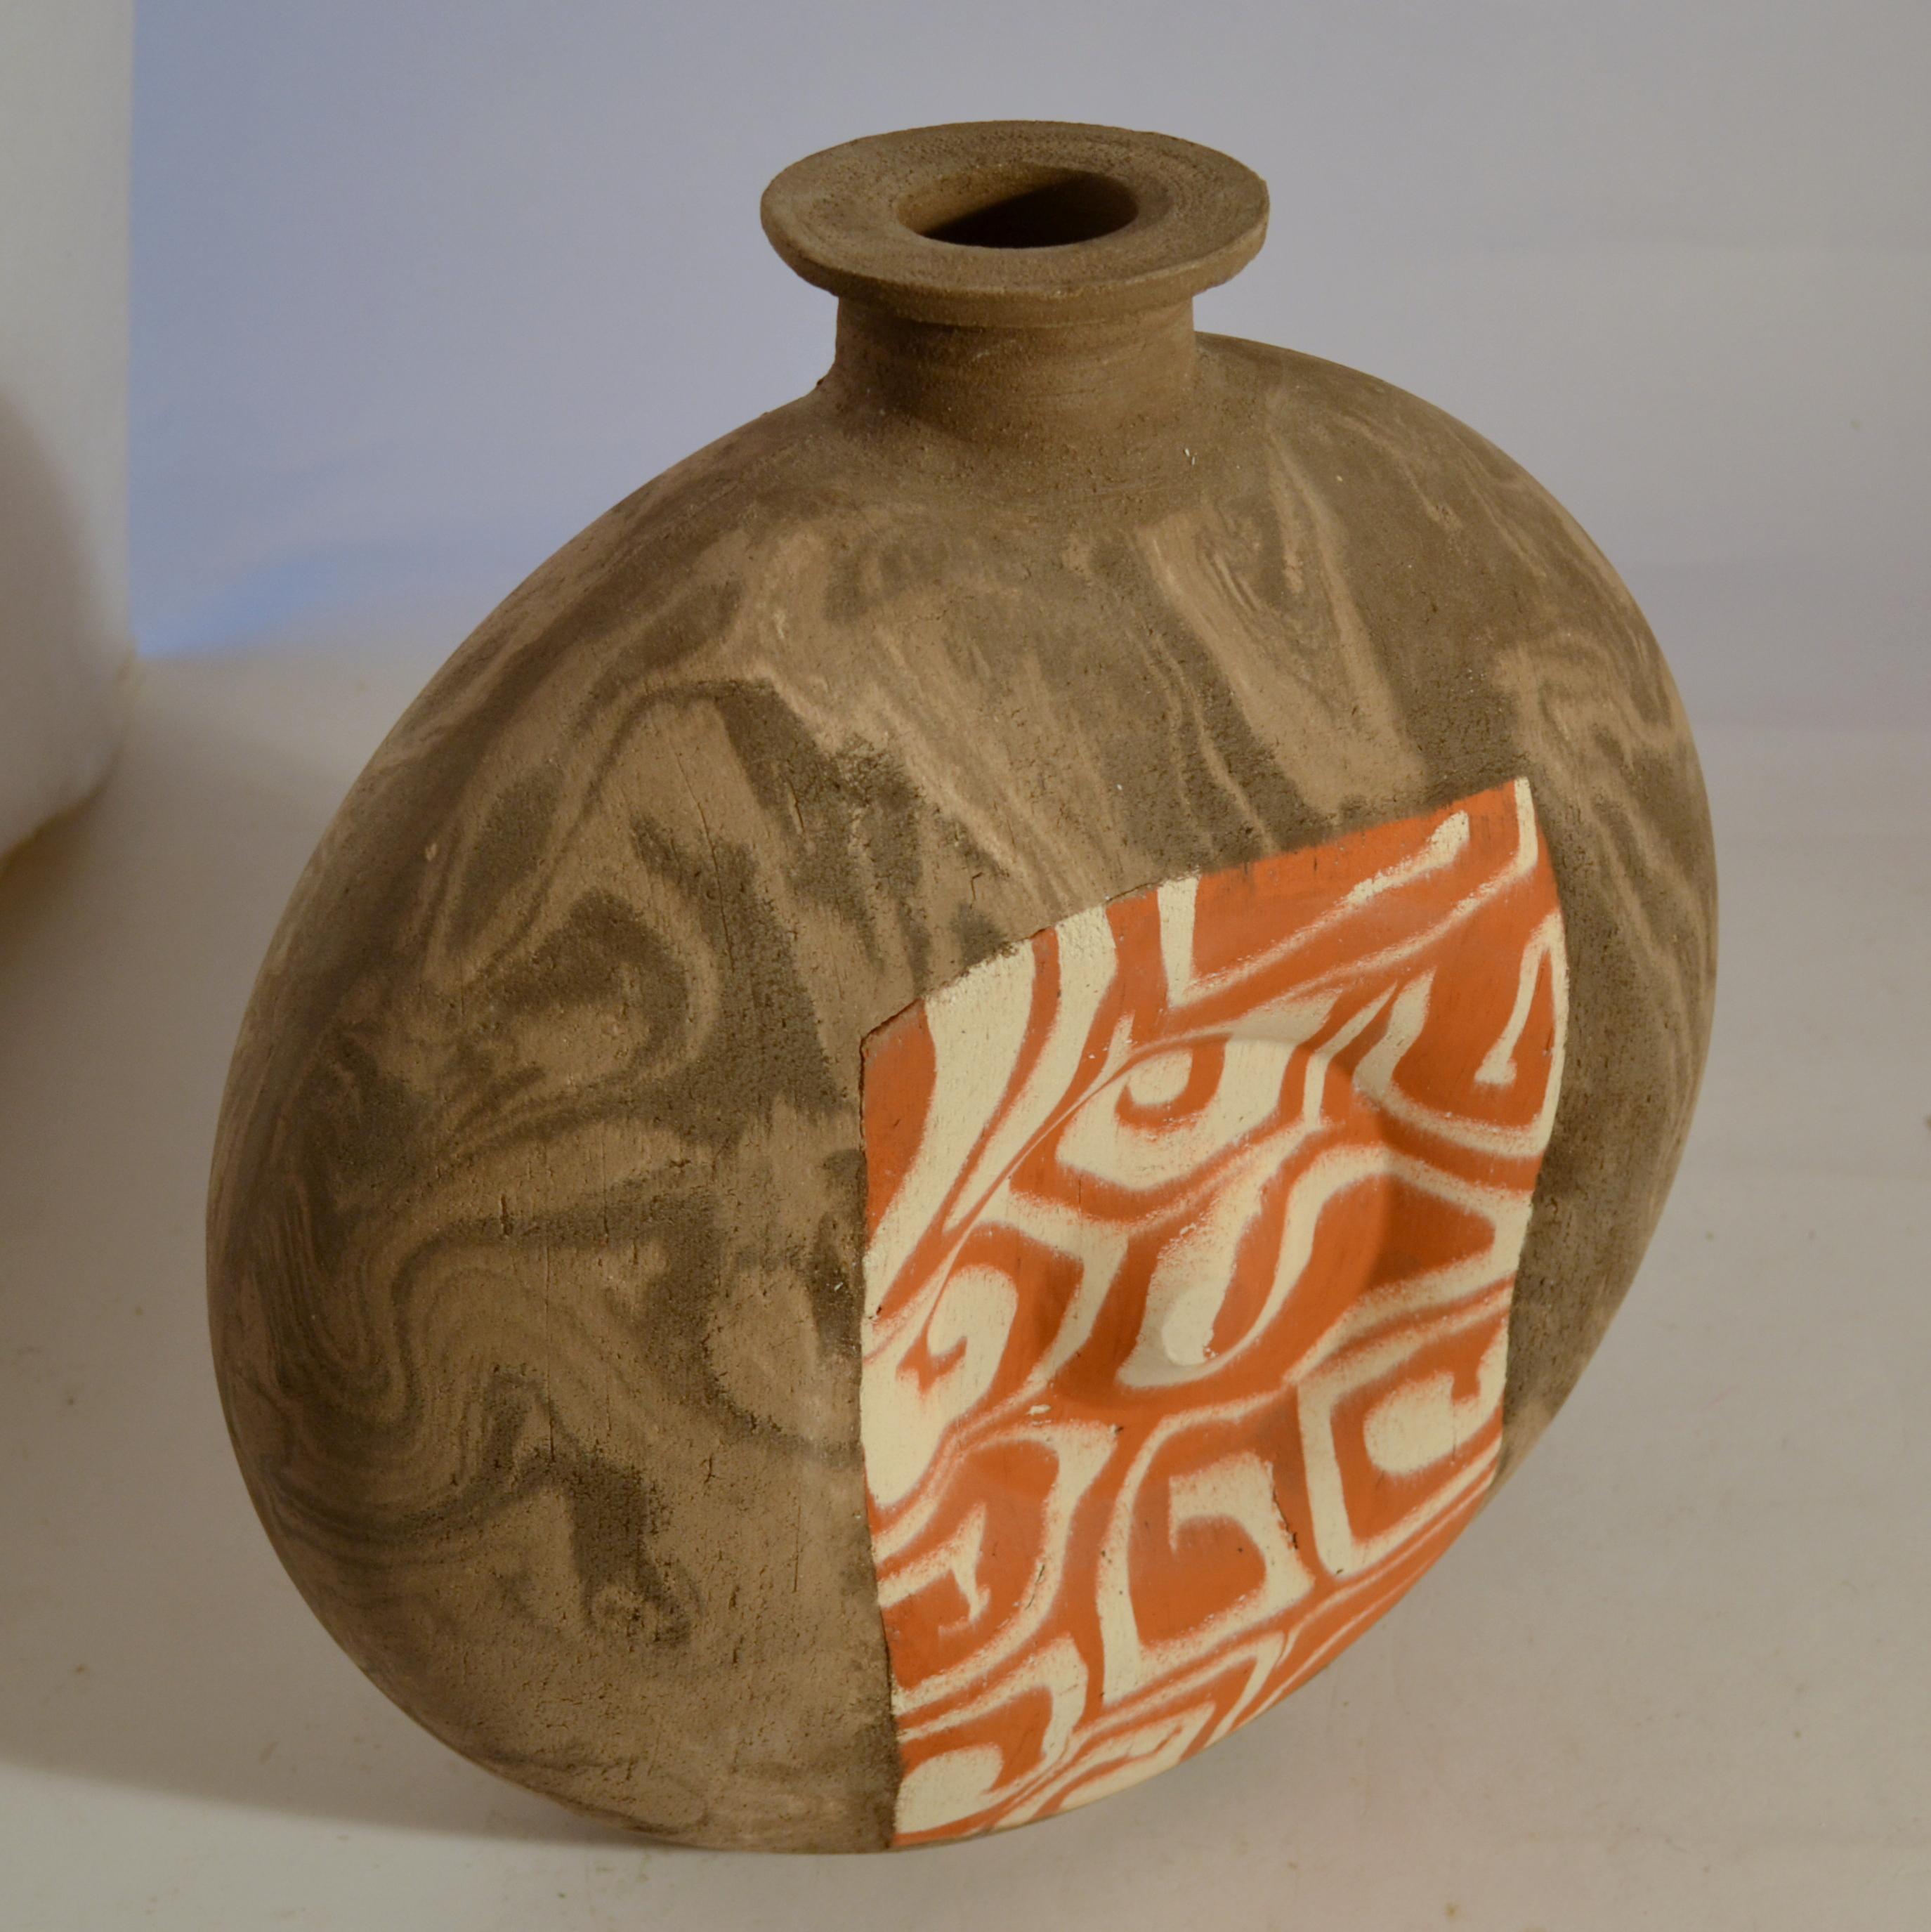 Dutch Large Decorative Studio Pottery Vases in Geometric Patterns and Earth Tones For Sale